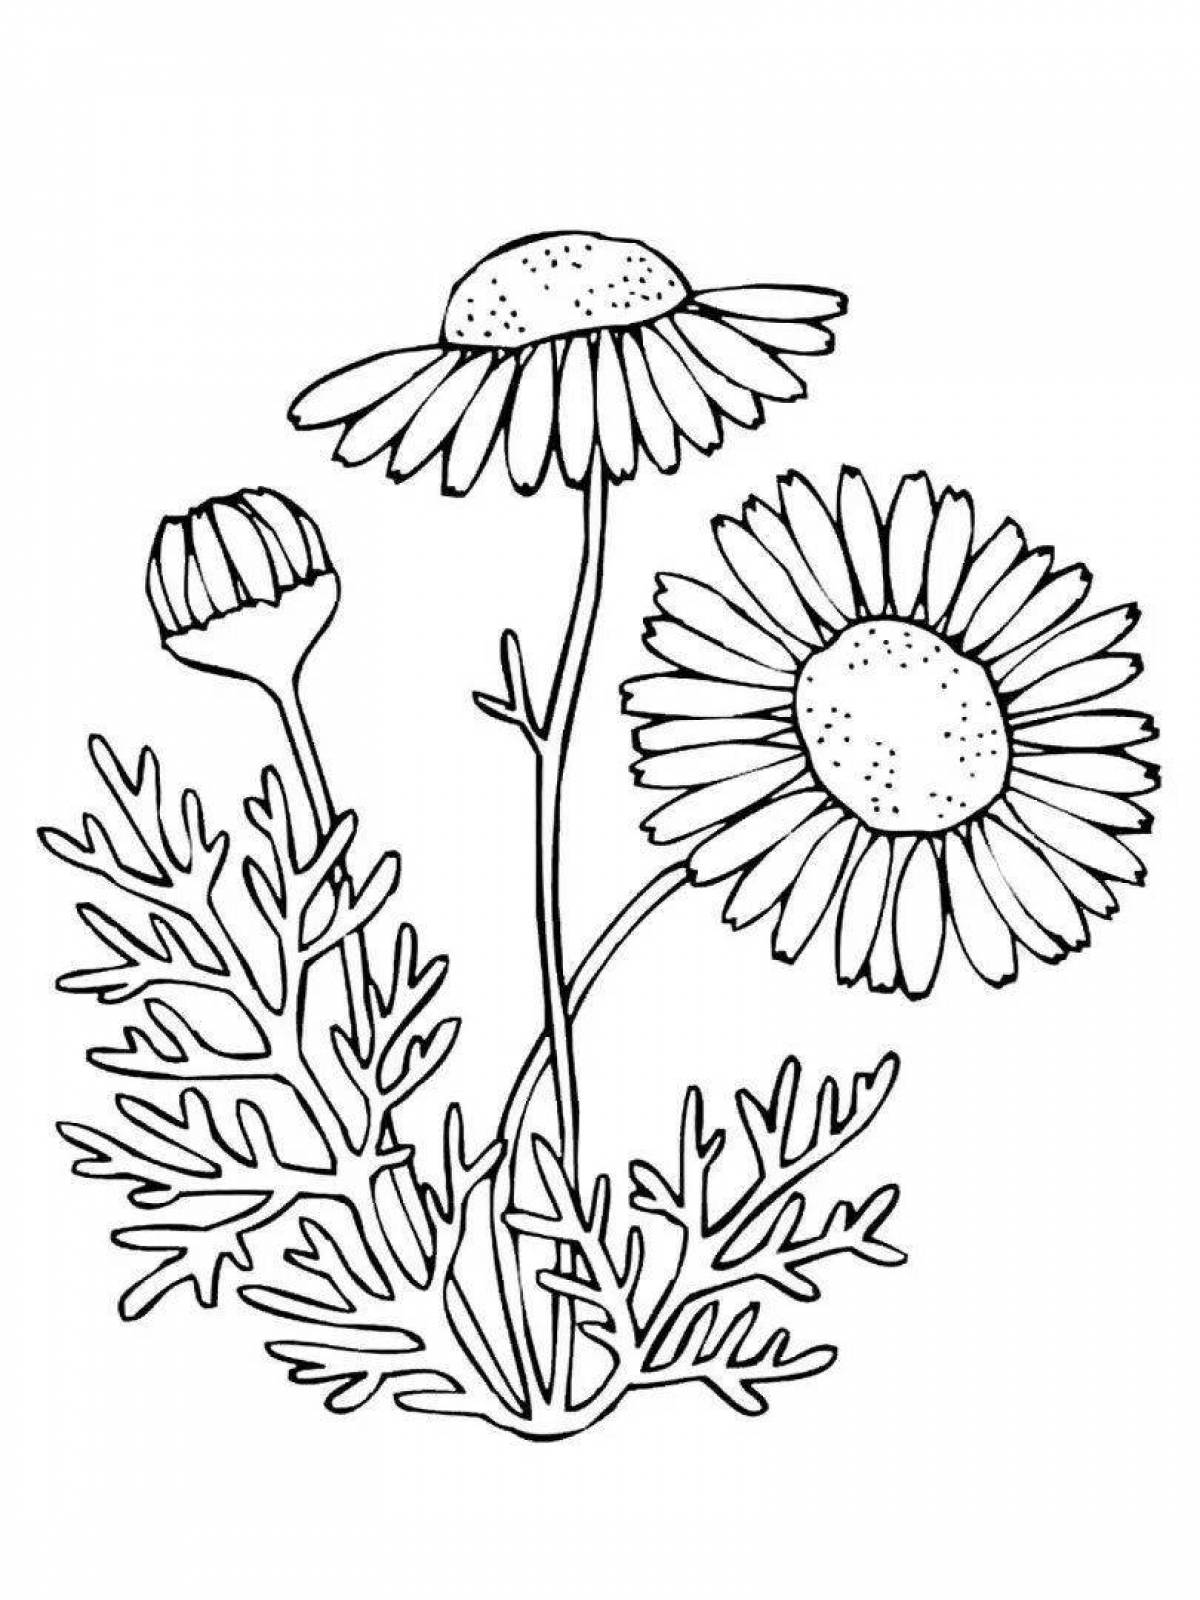 Amazing daisy coloring pages for kids